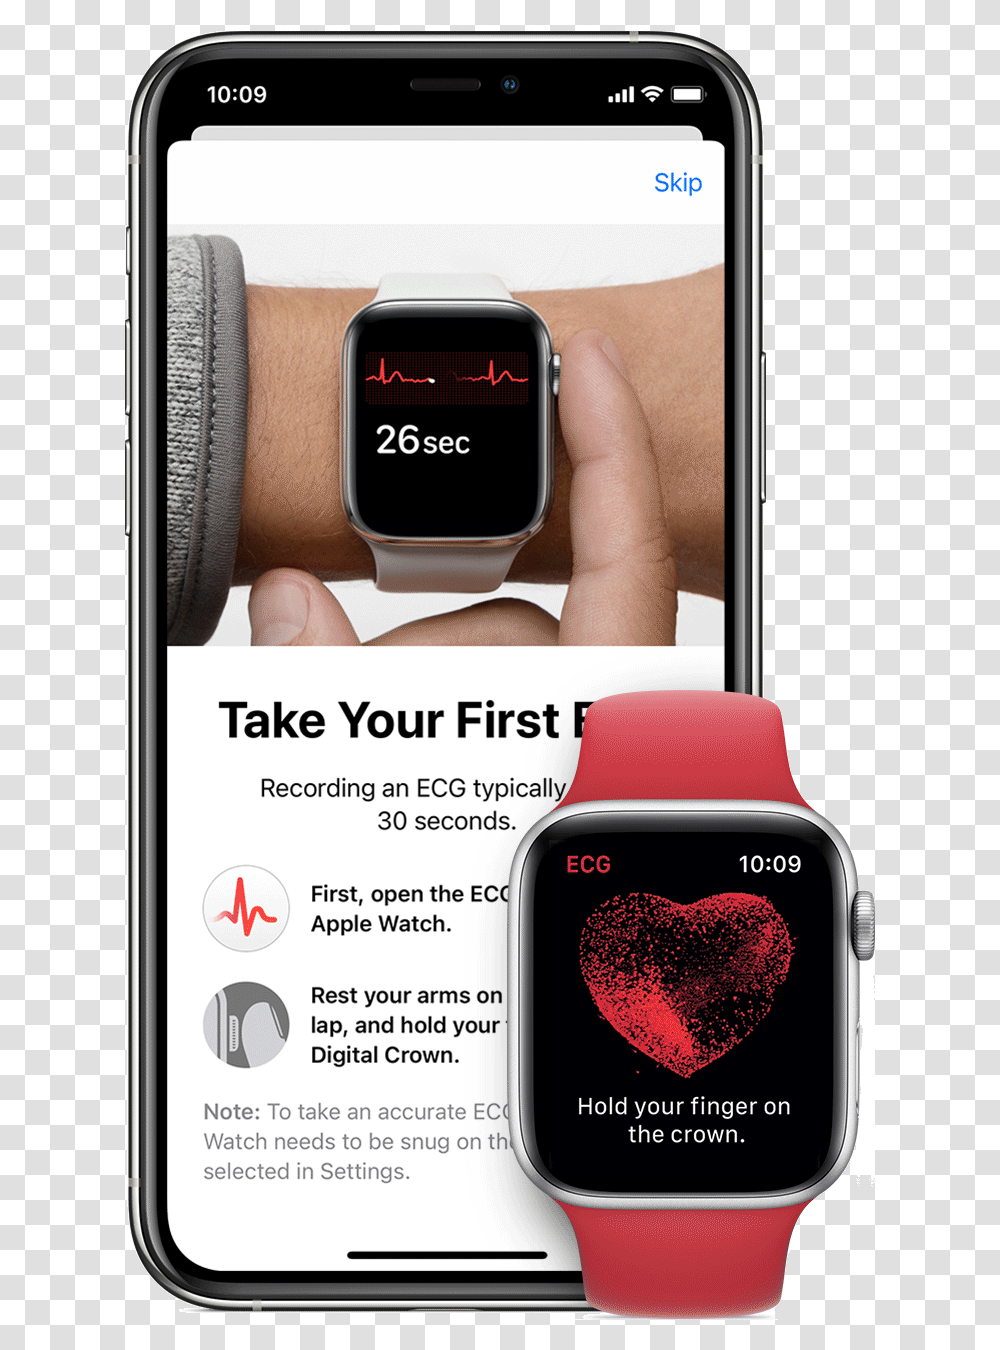 The Ecg App Ecg Apple Watch, Wristwatch, Mobile Phone, Electronics, Cell Phone Transparent Png